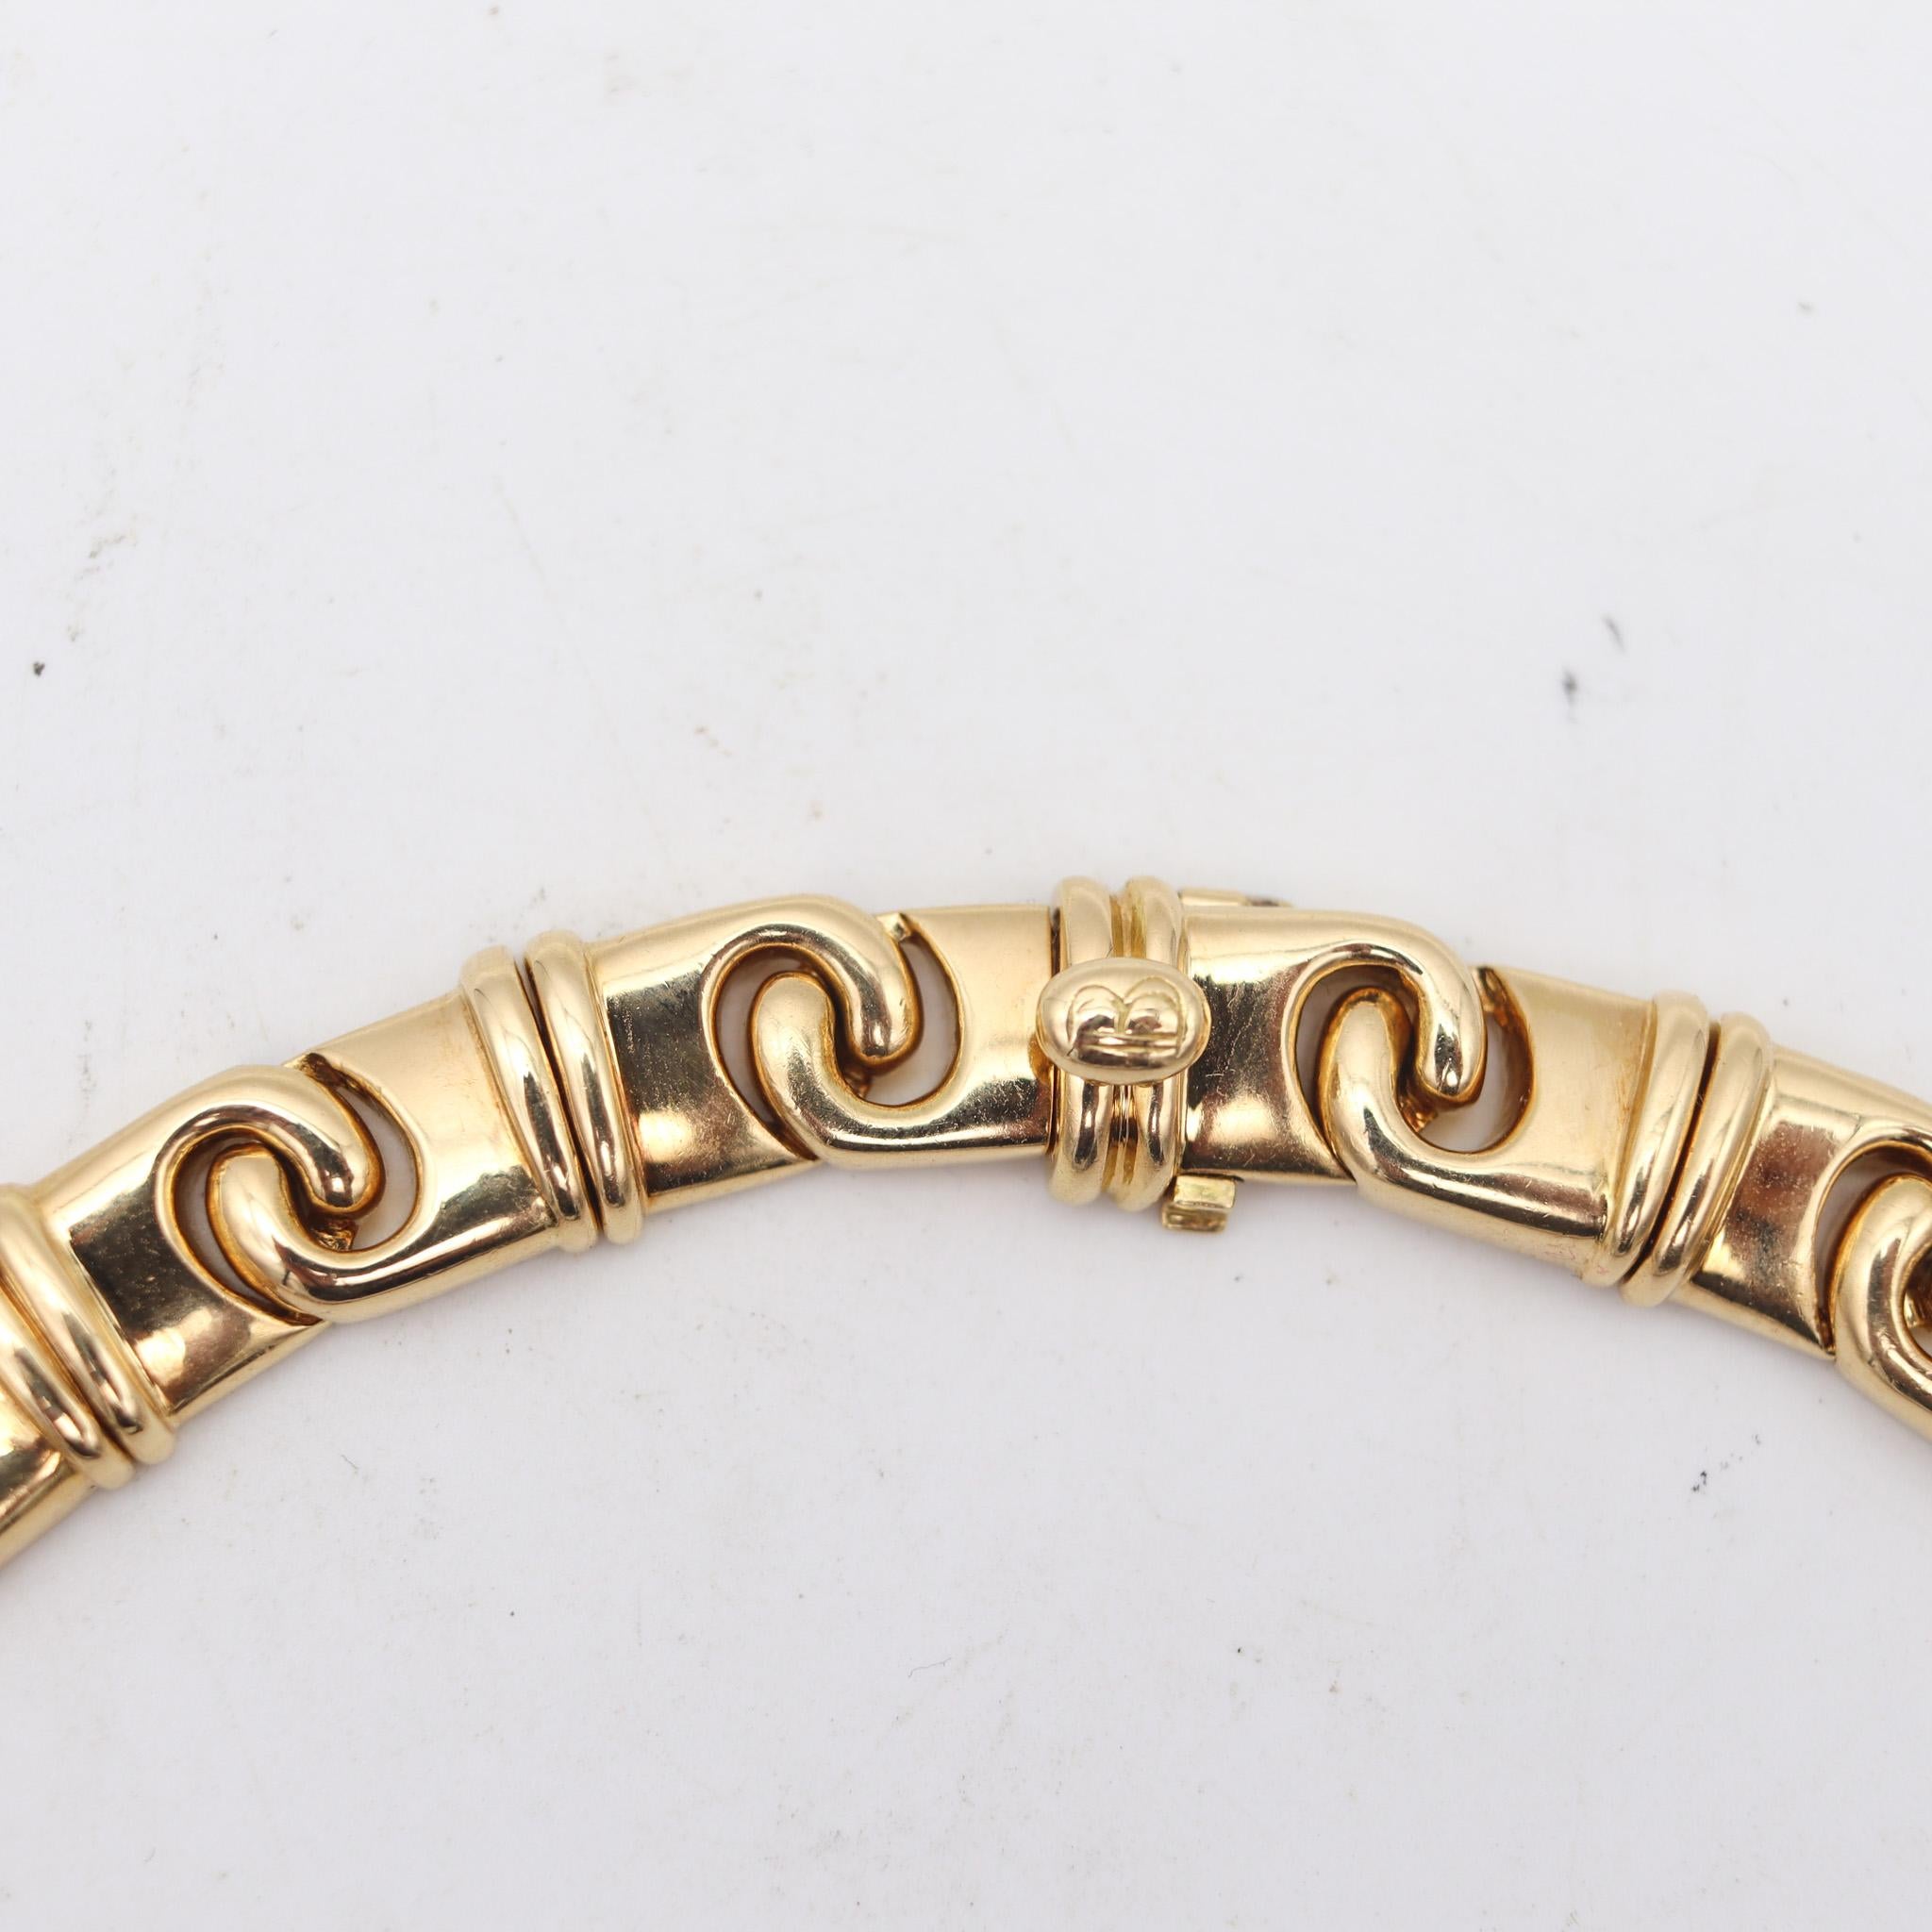 Bvlgari Roma Doppio Links Collar Necklace In Solid 18Kt Yellow Gold In Excellent Condition For Sale In Miami, FL